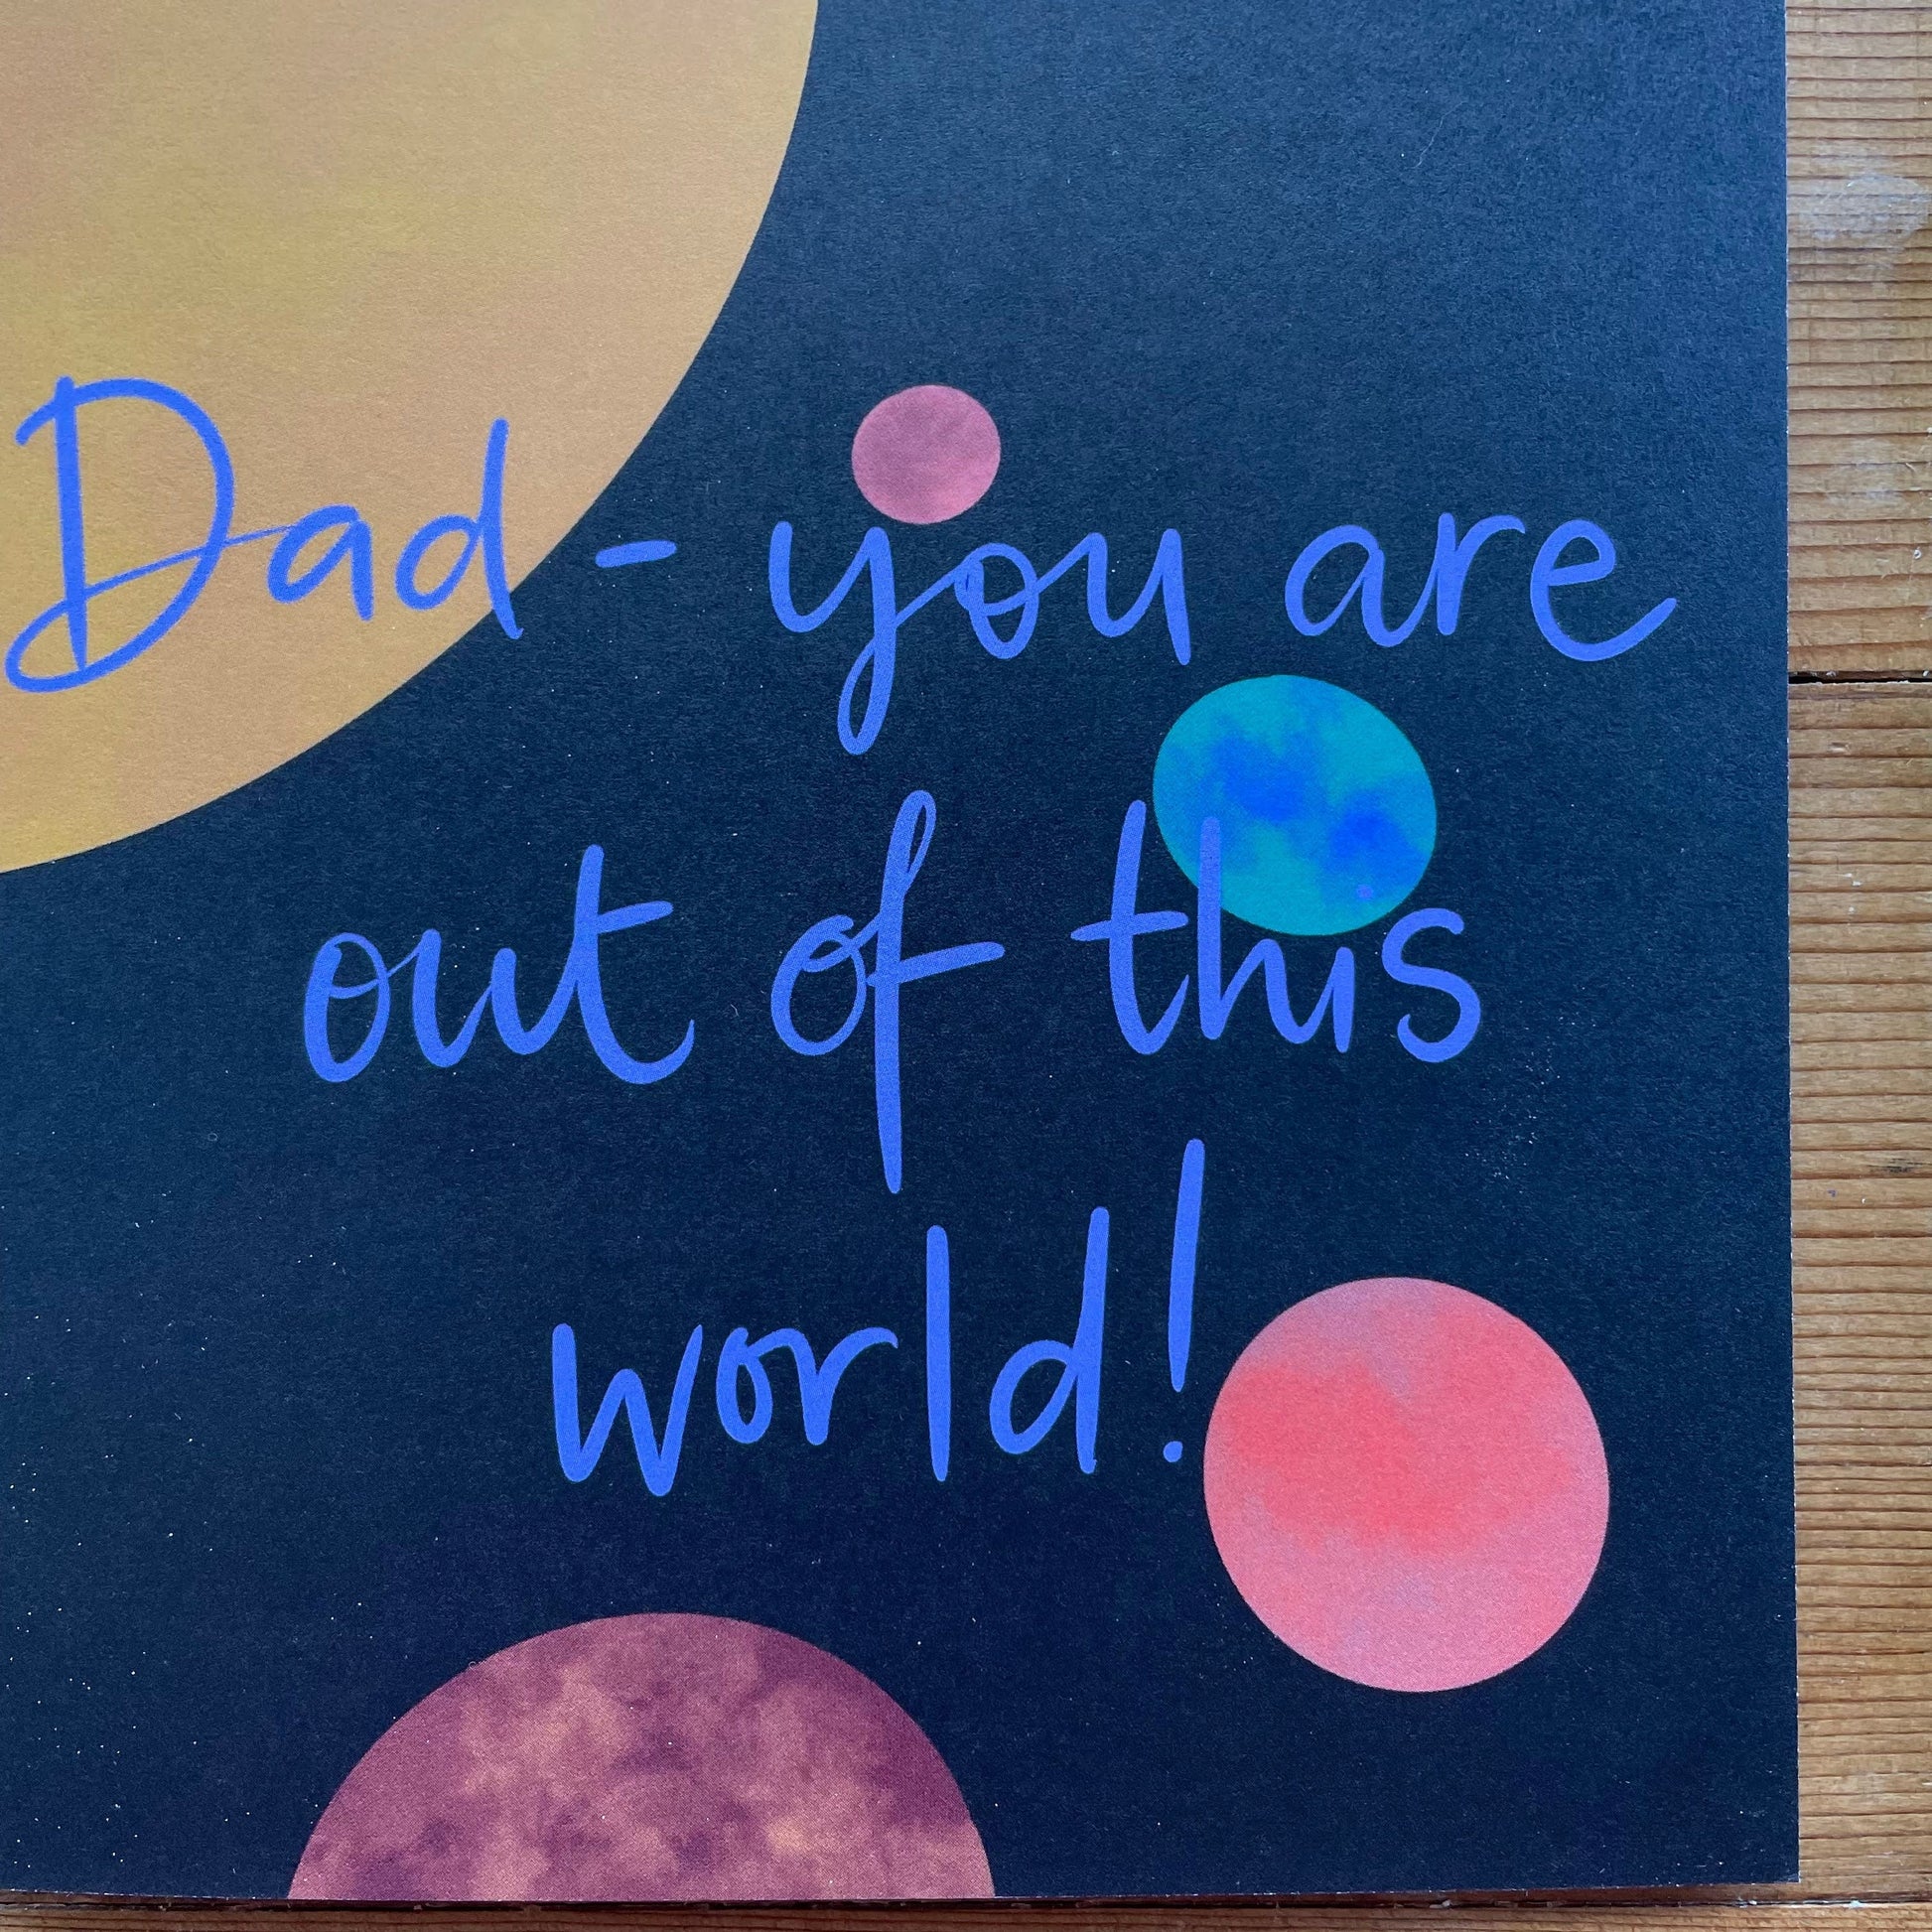 And Hope Designs Greeting & Note Cards Dad you’re out of this world card